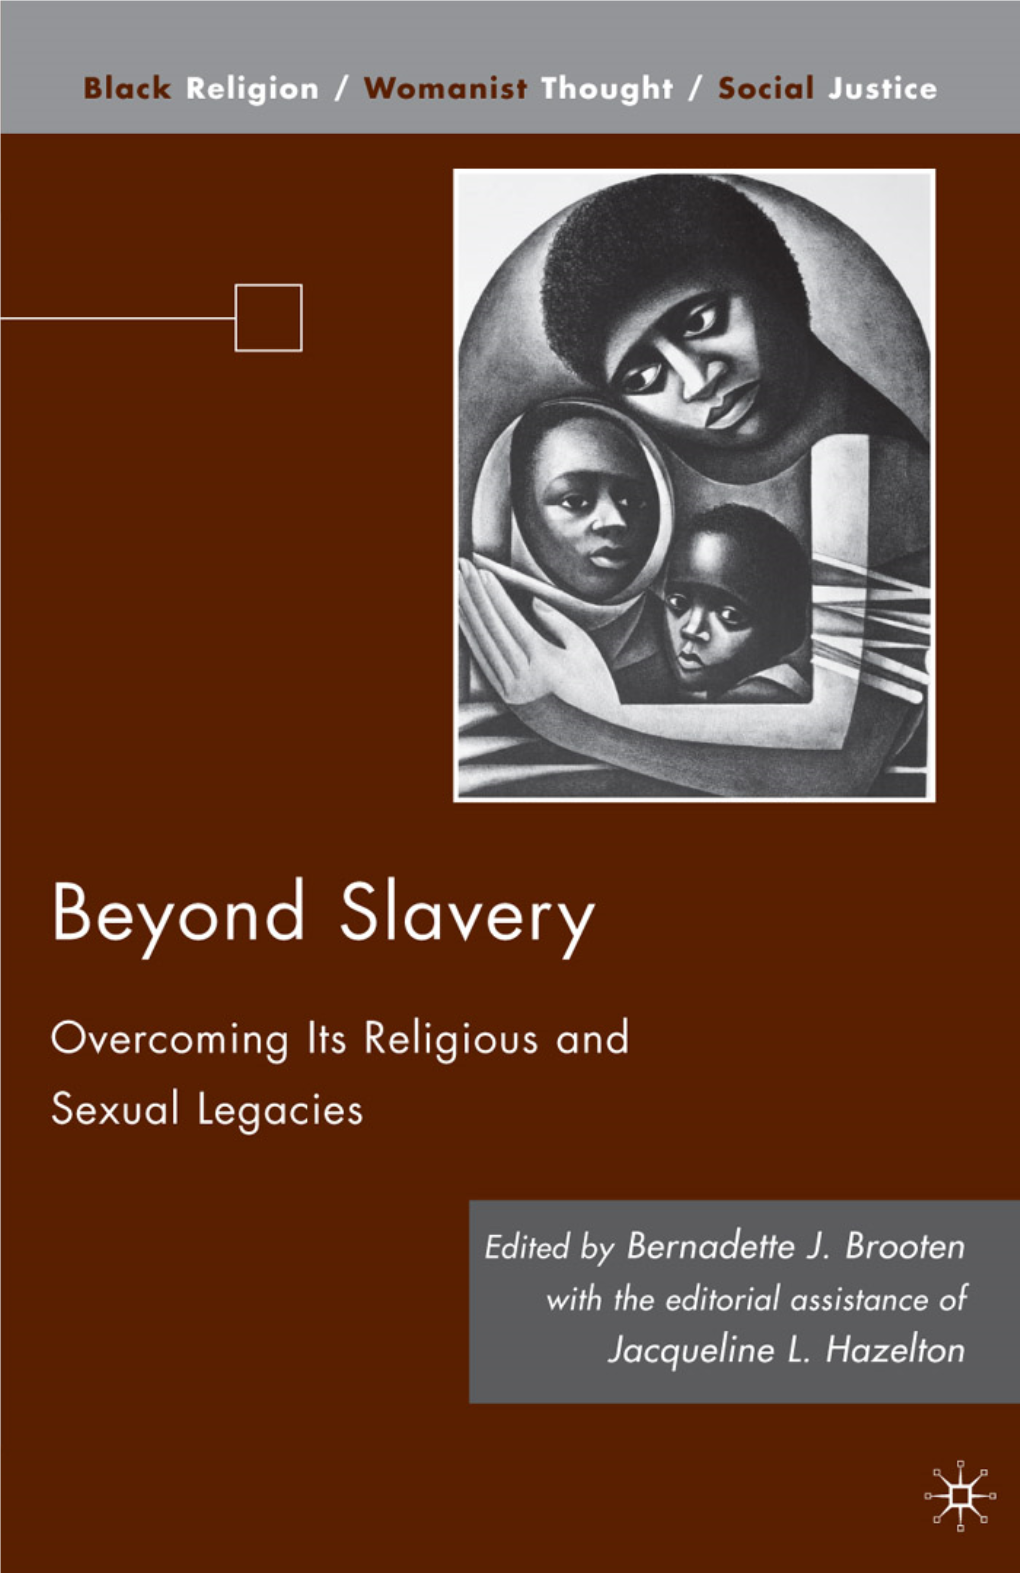 Beyond Slavery: Overcoming Its Religious and Sexual Legacies Edited by Bernadette J